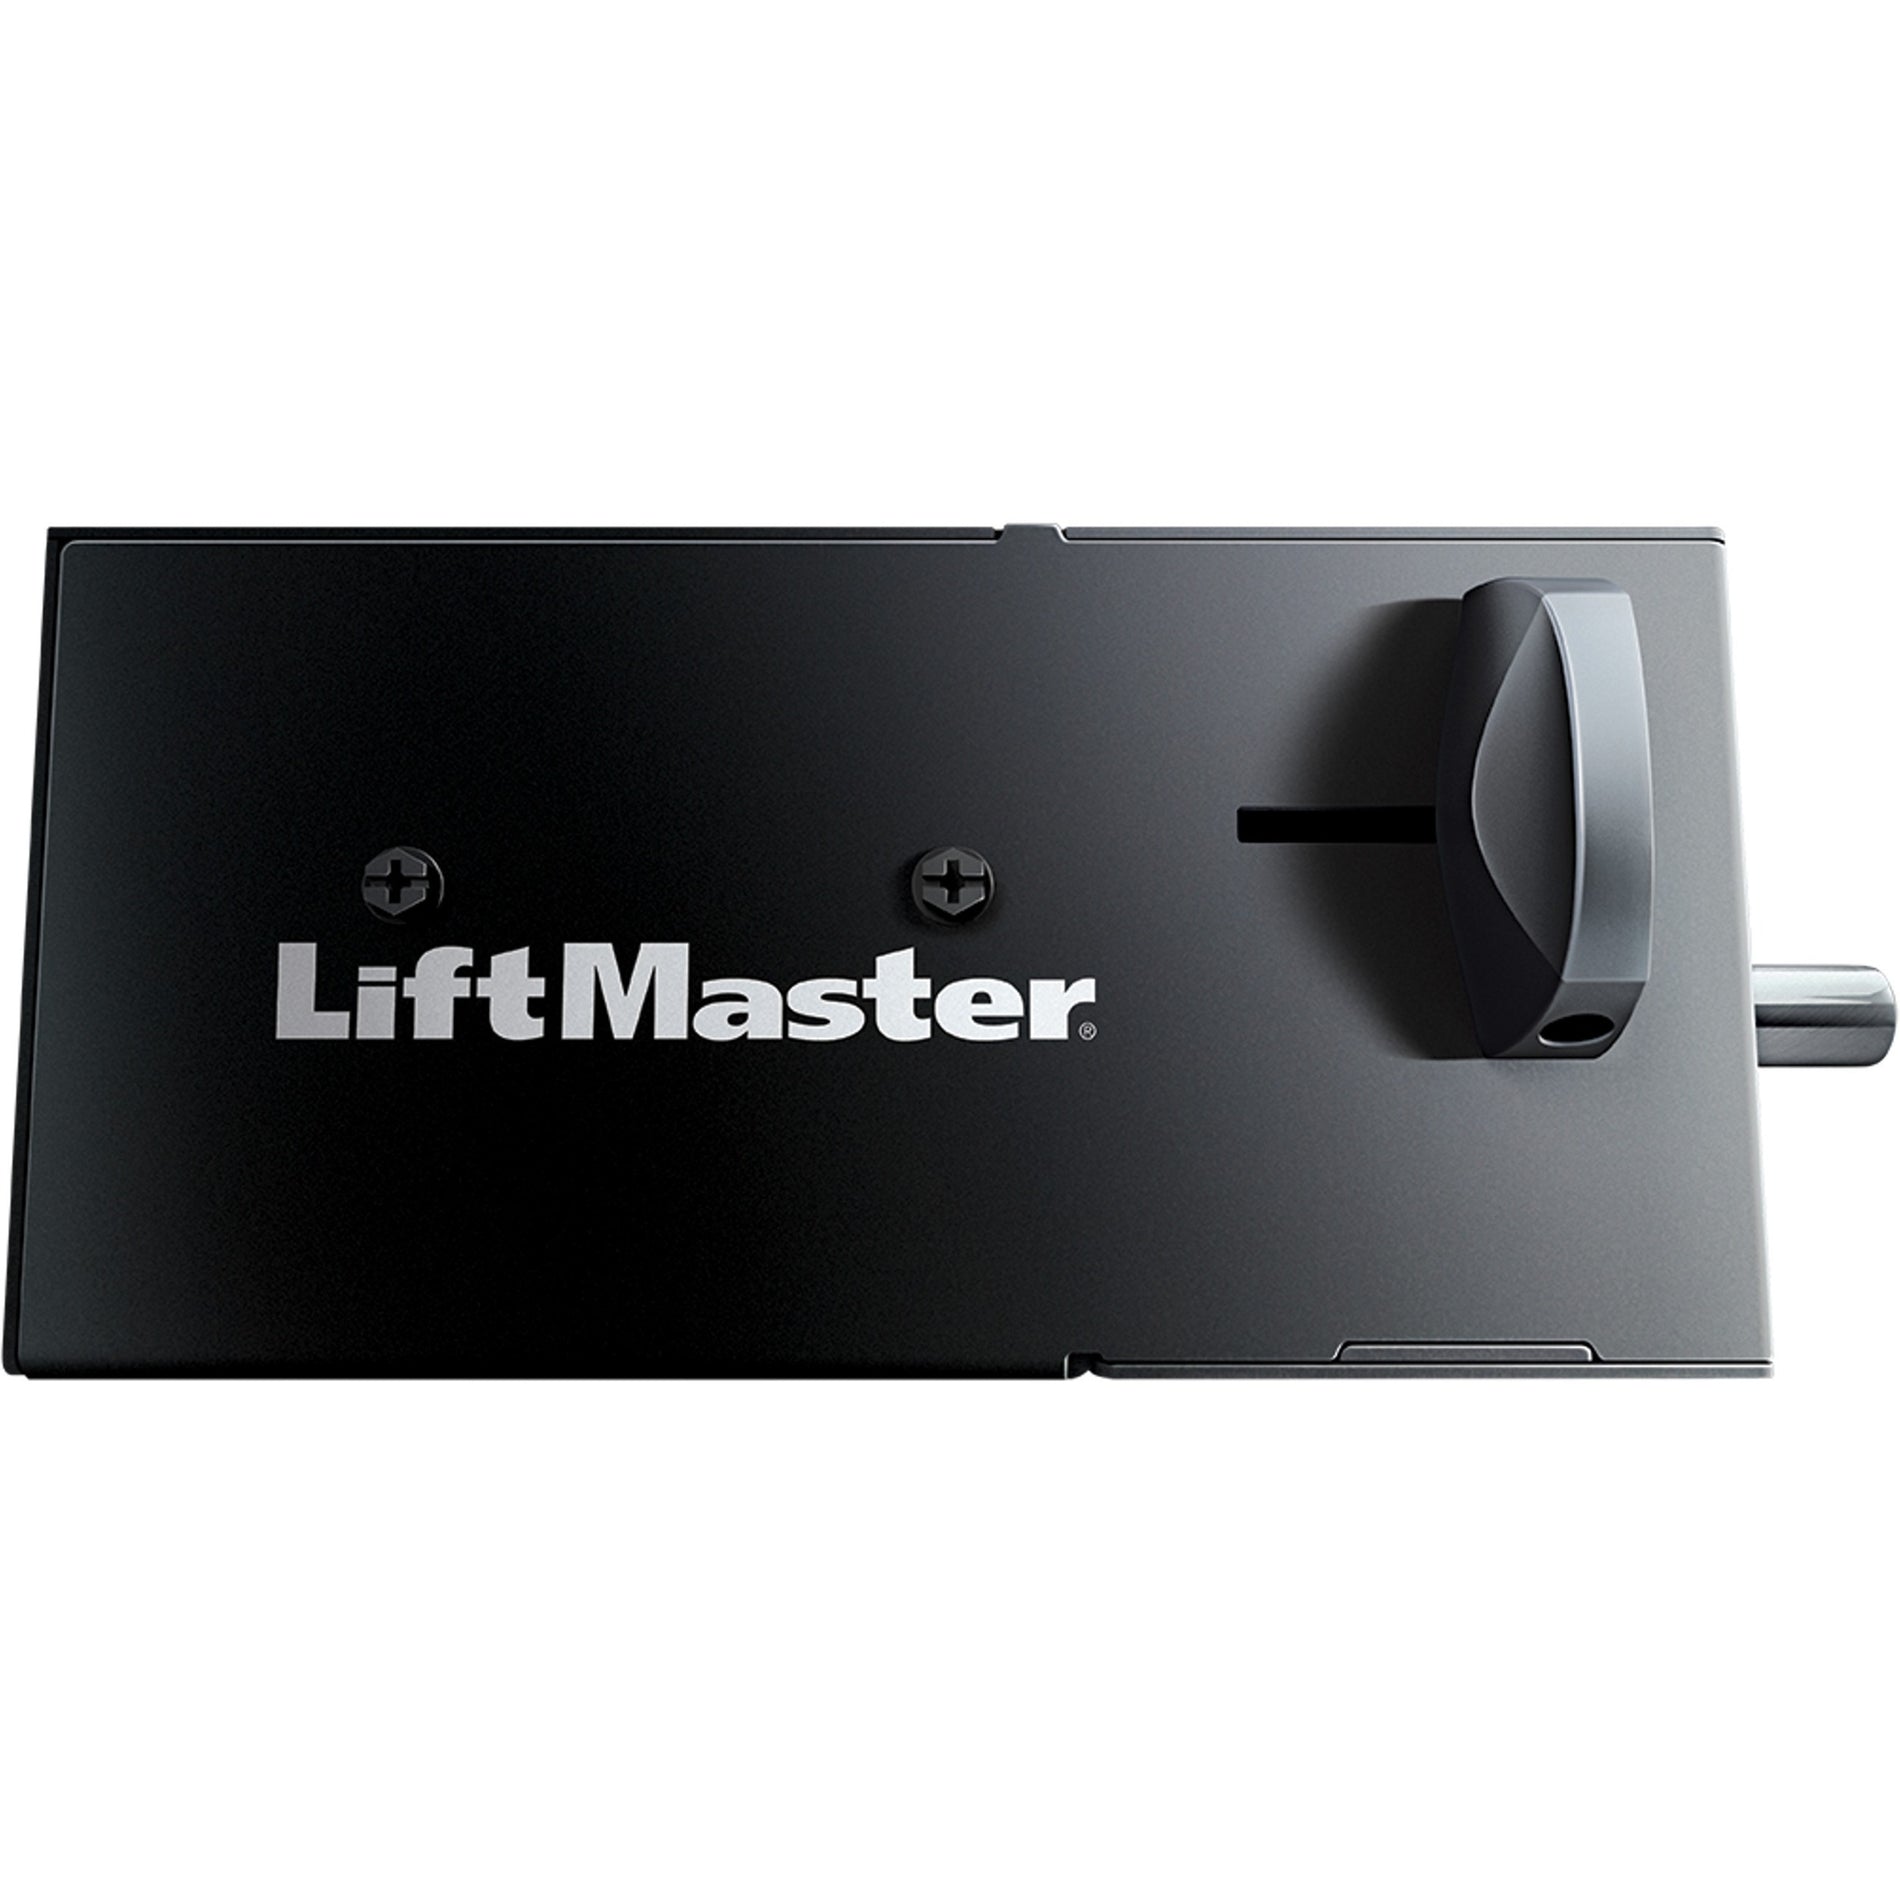 Liftmaster 841LM Electric Deadbolt, Secure Your Door with Ease